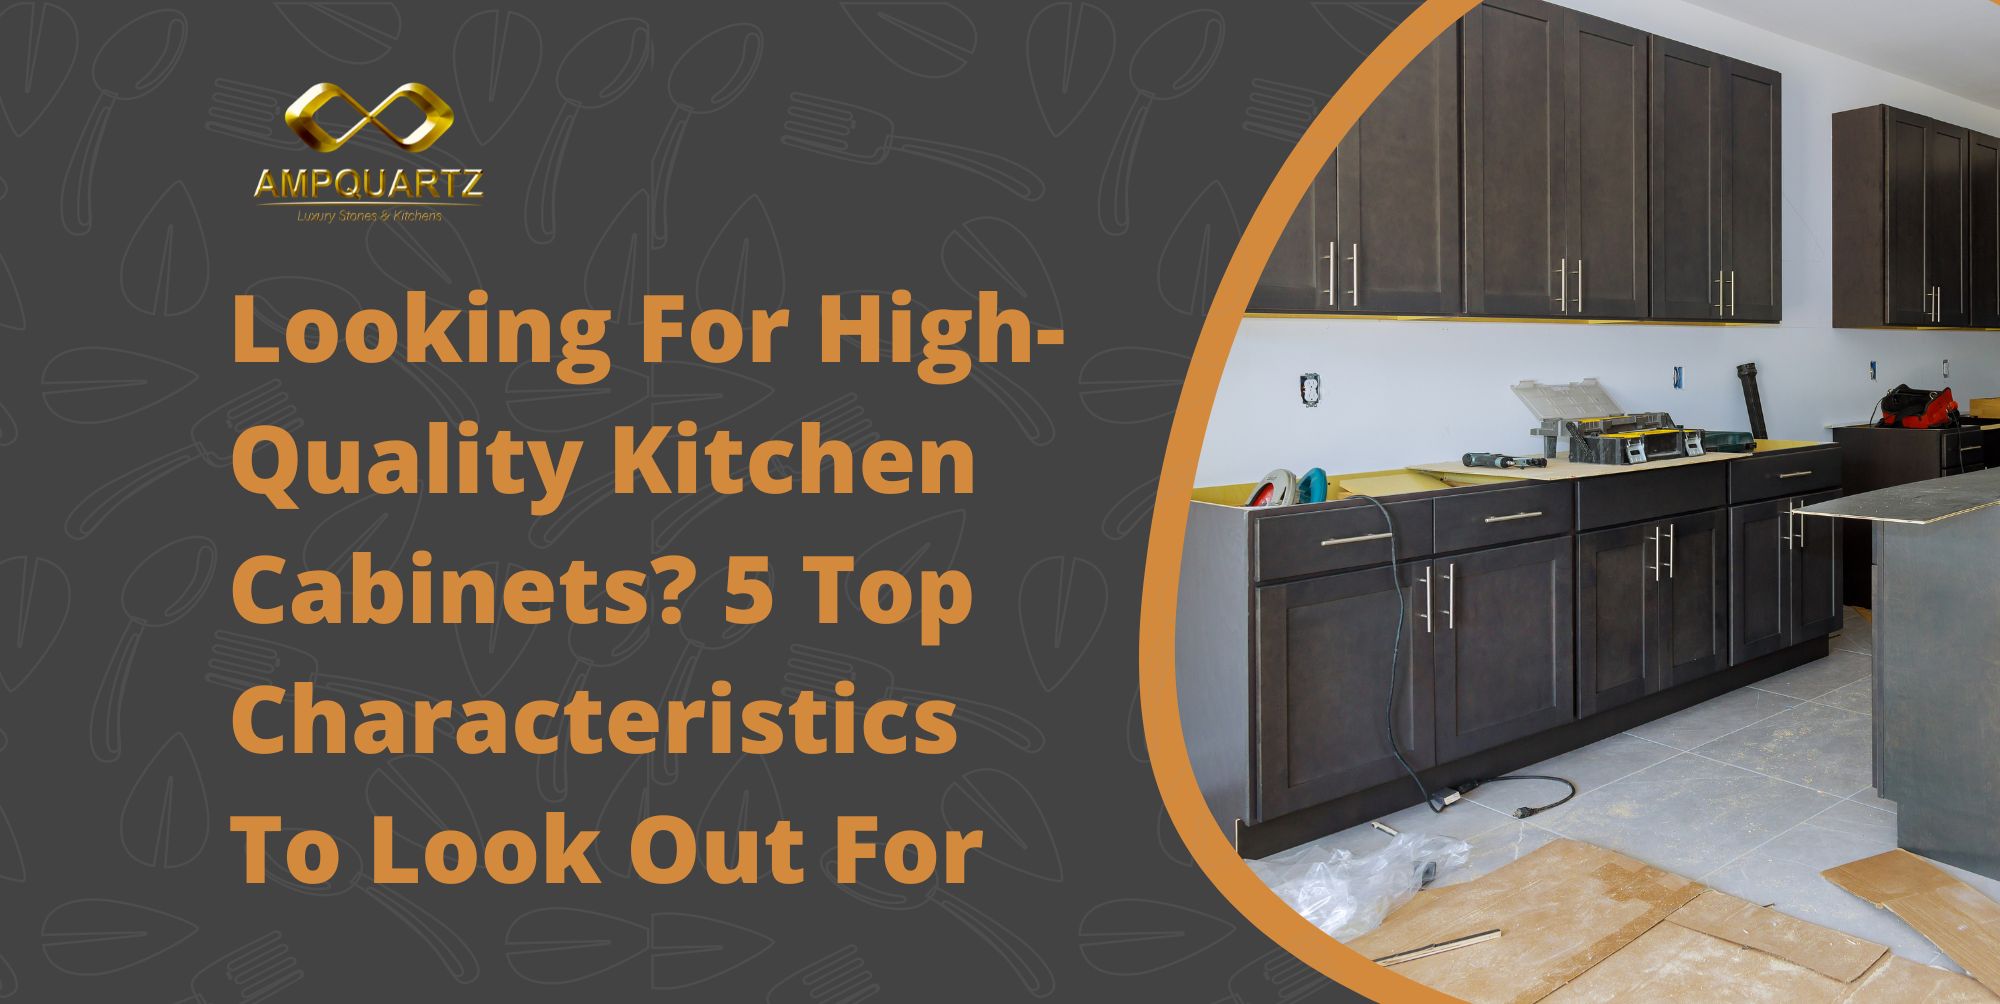 High-Quality Kitchen Cabinets